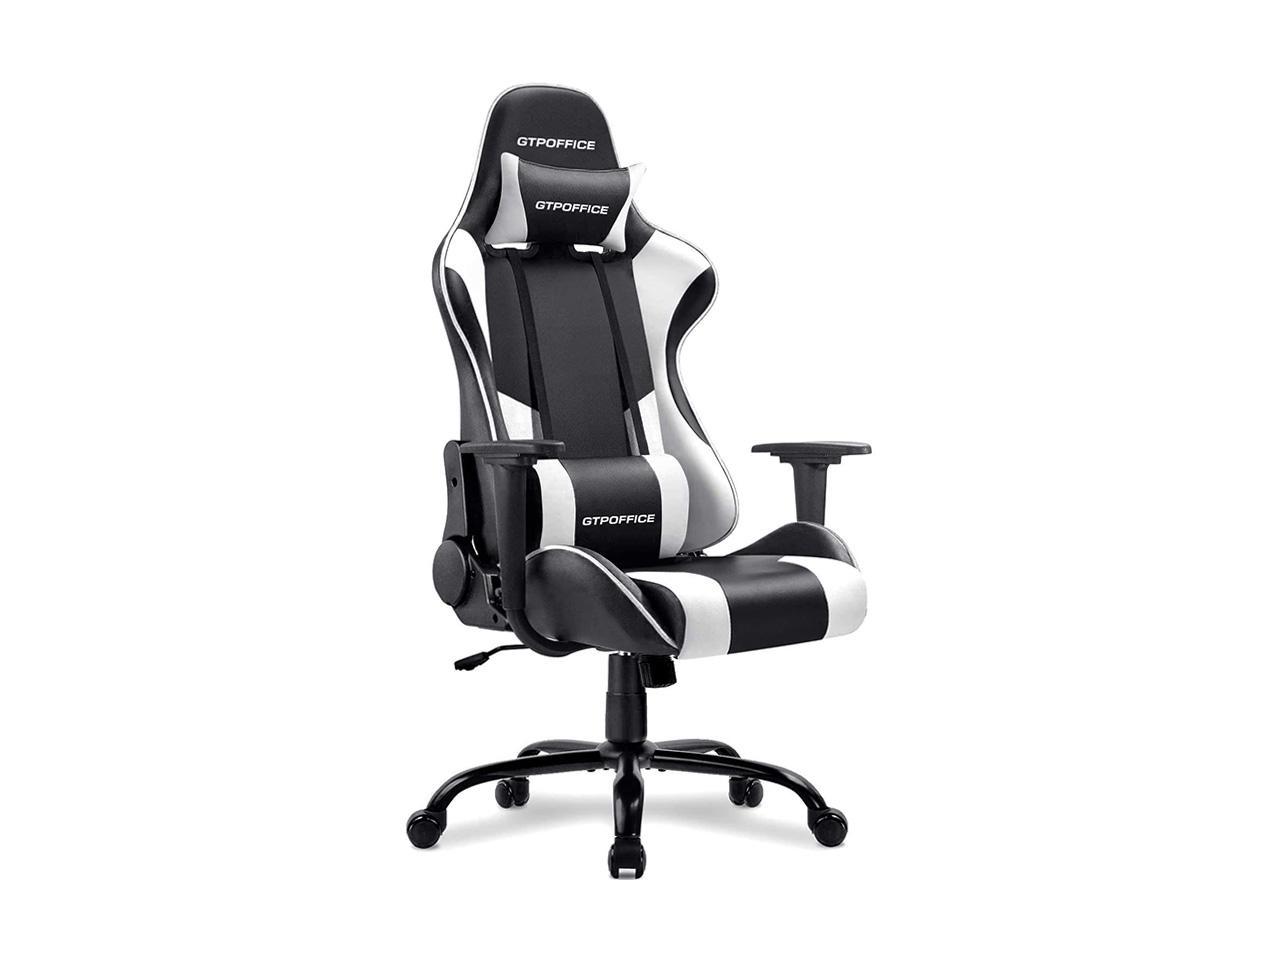 Gtracing Gaming Chair Massage Office Computer Gtpoffice Series Racing Chair For Adult Reclining Adjustable Swivel Leather Chair High Back Desk Chair Headrest And Massage Lumbar Support Cushion Newegg Com